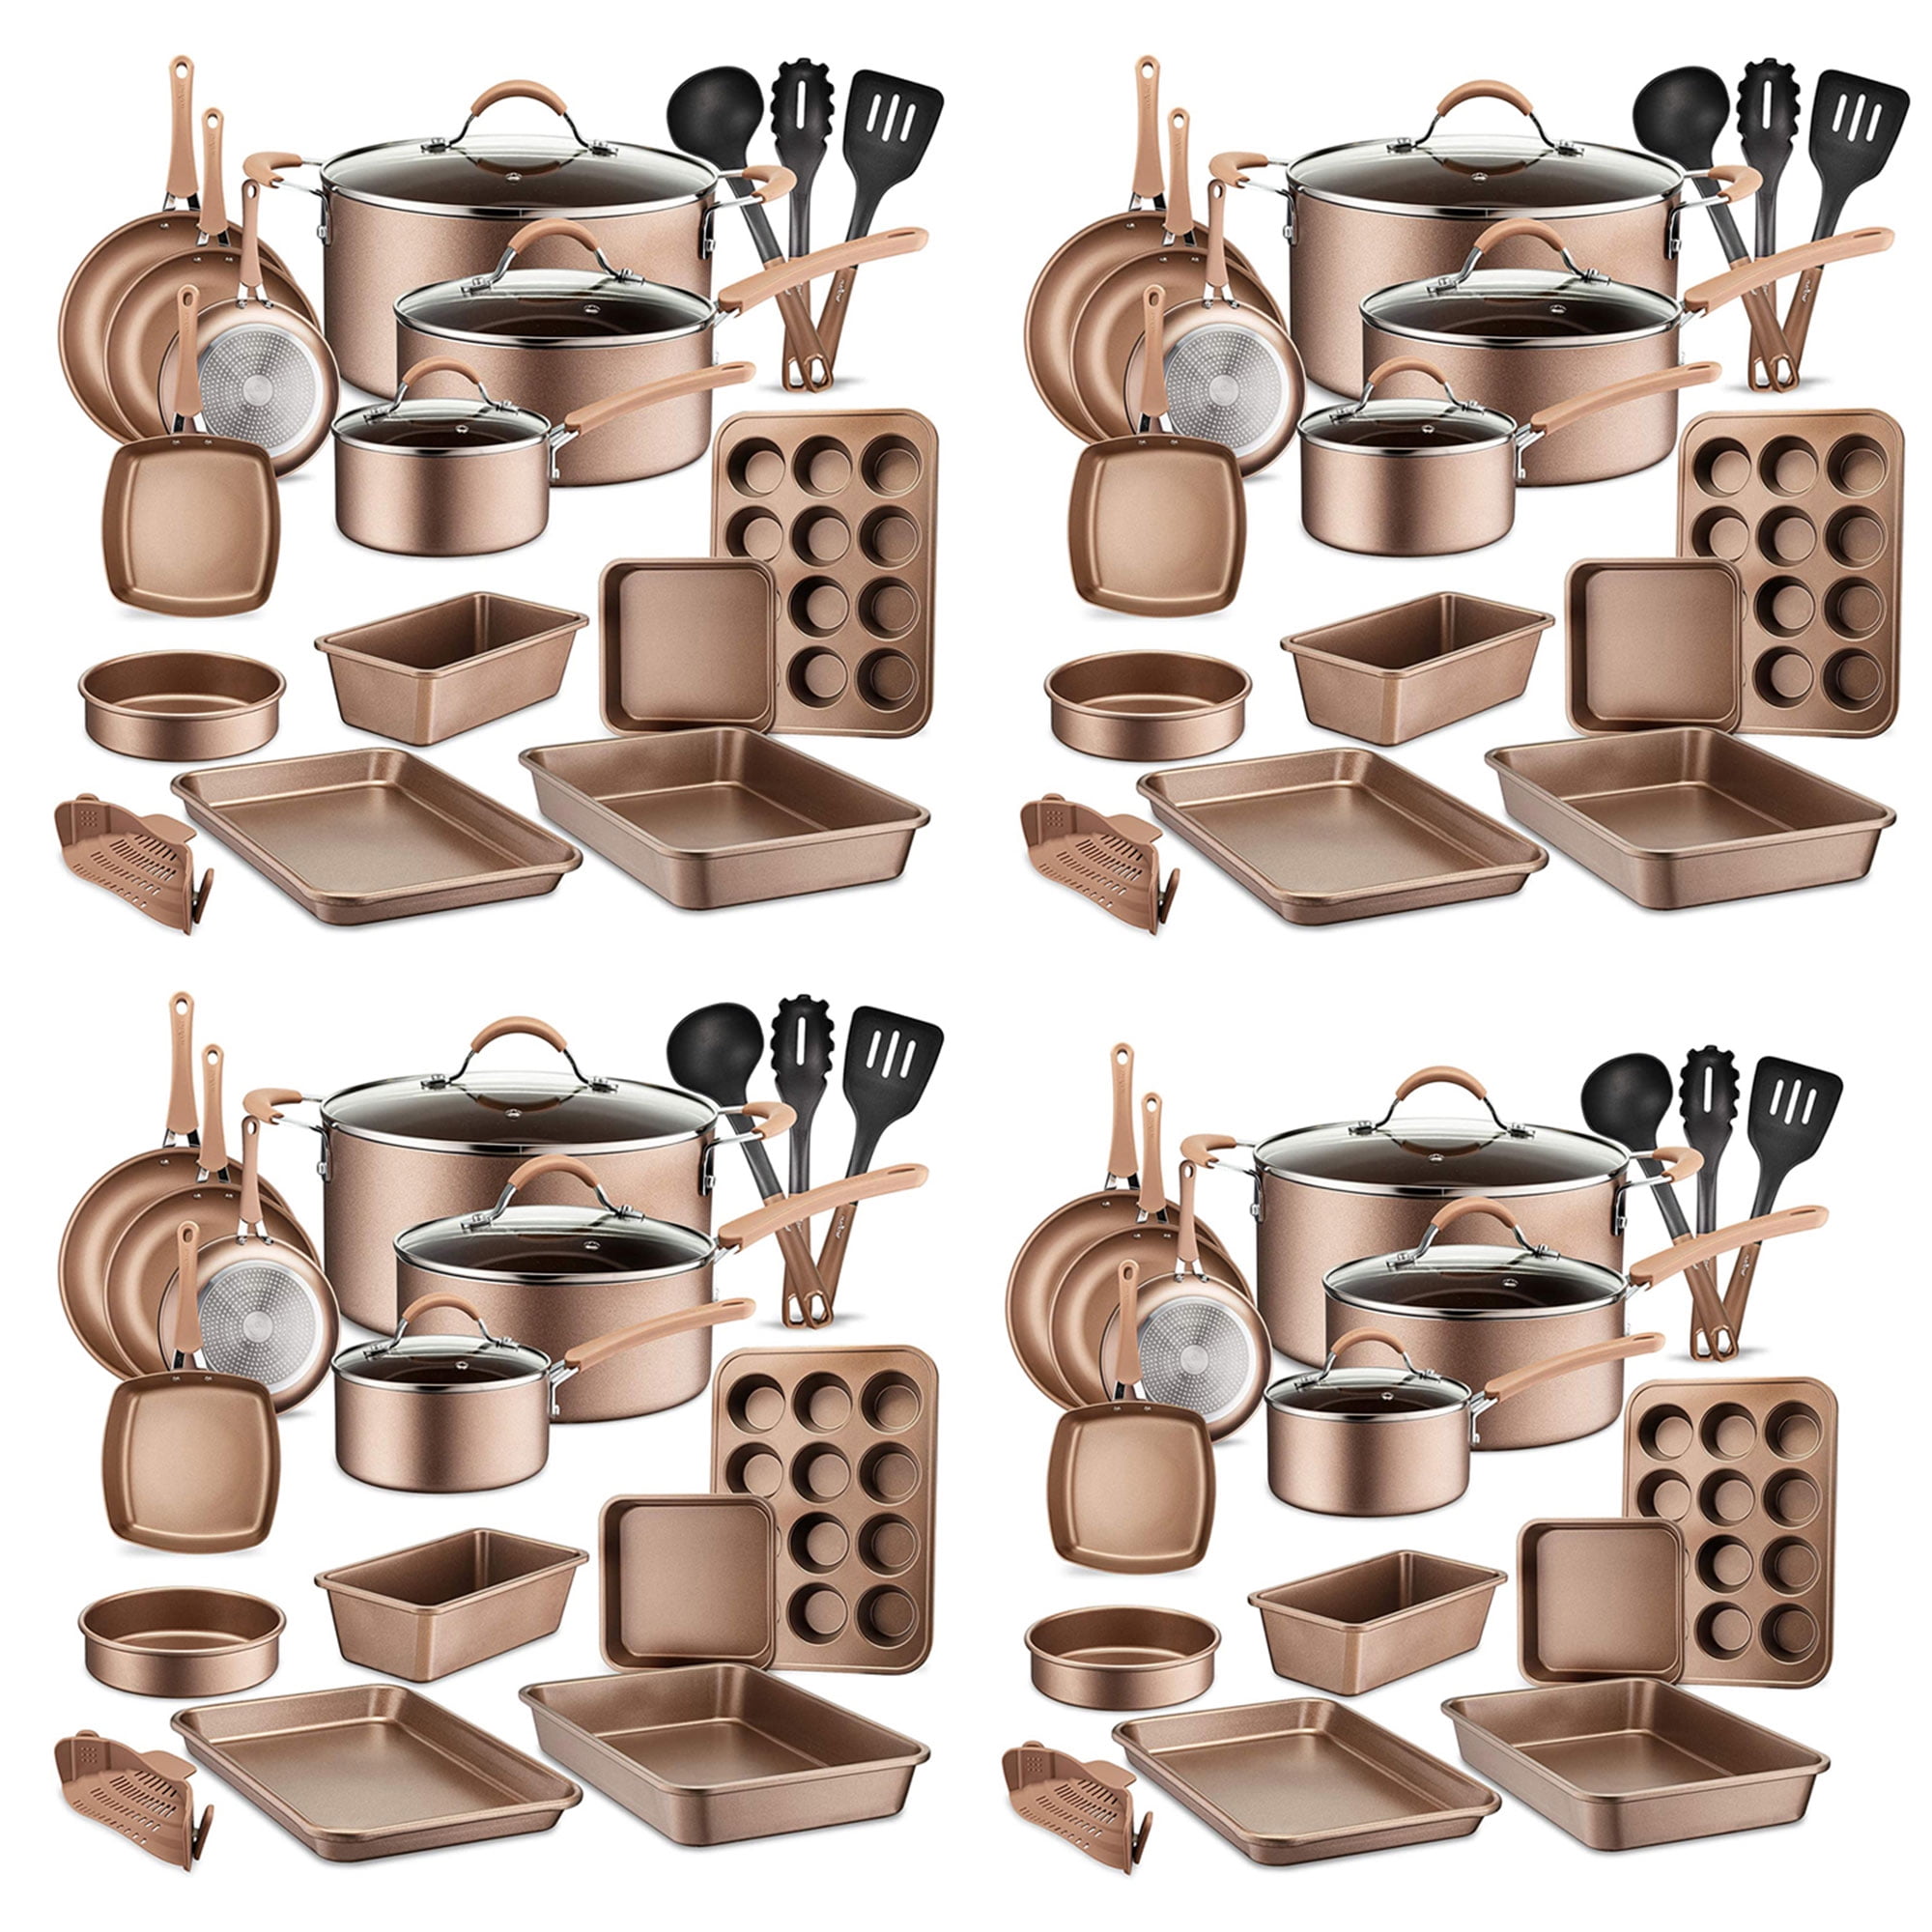 NutriChef Nonstick Cooking Kitchen Cookware Pots and Pans, 20 Piece Set,  Pink